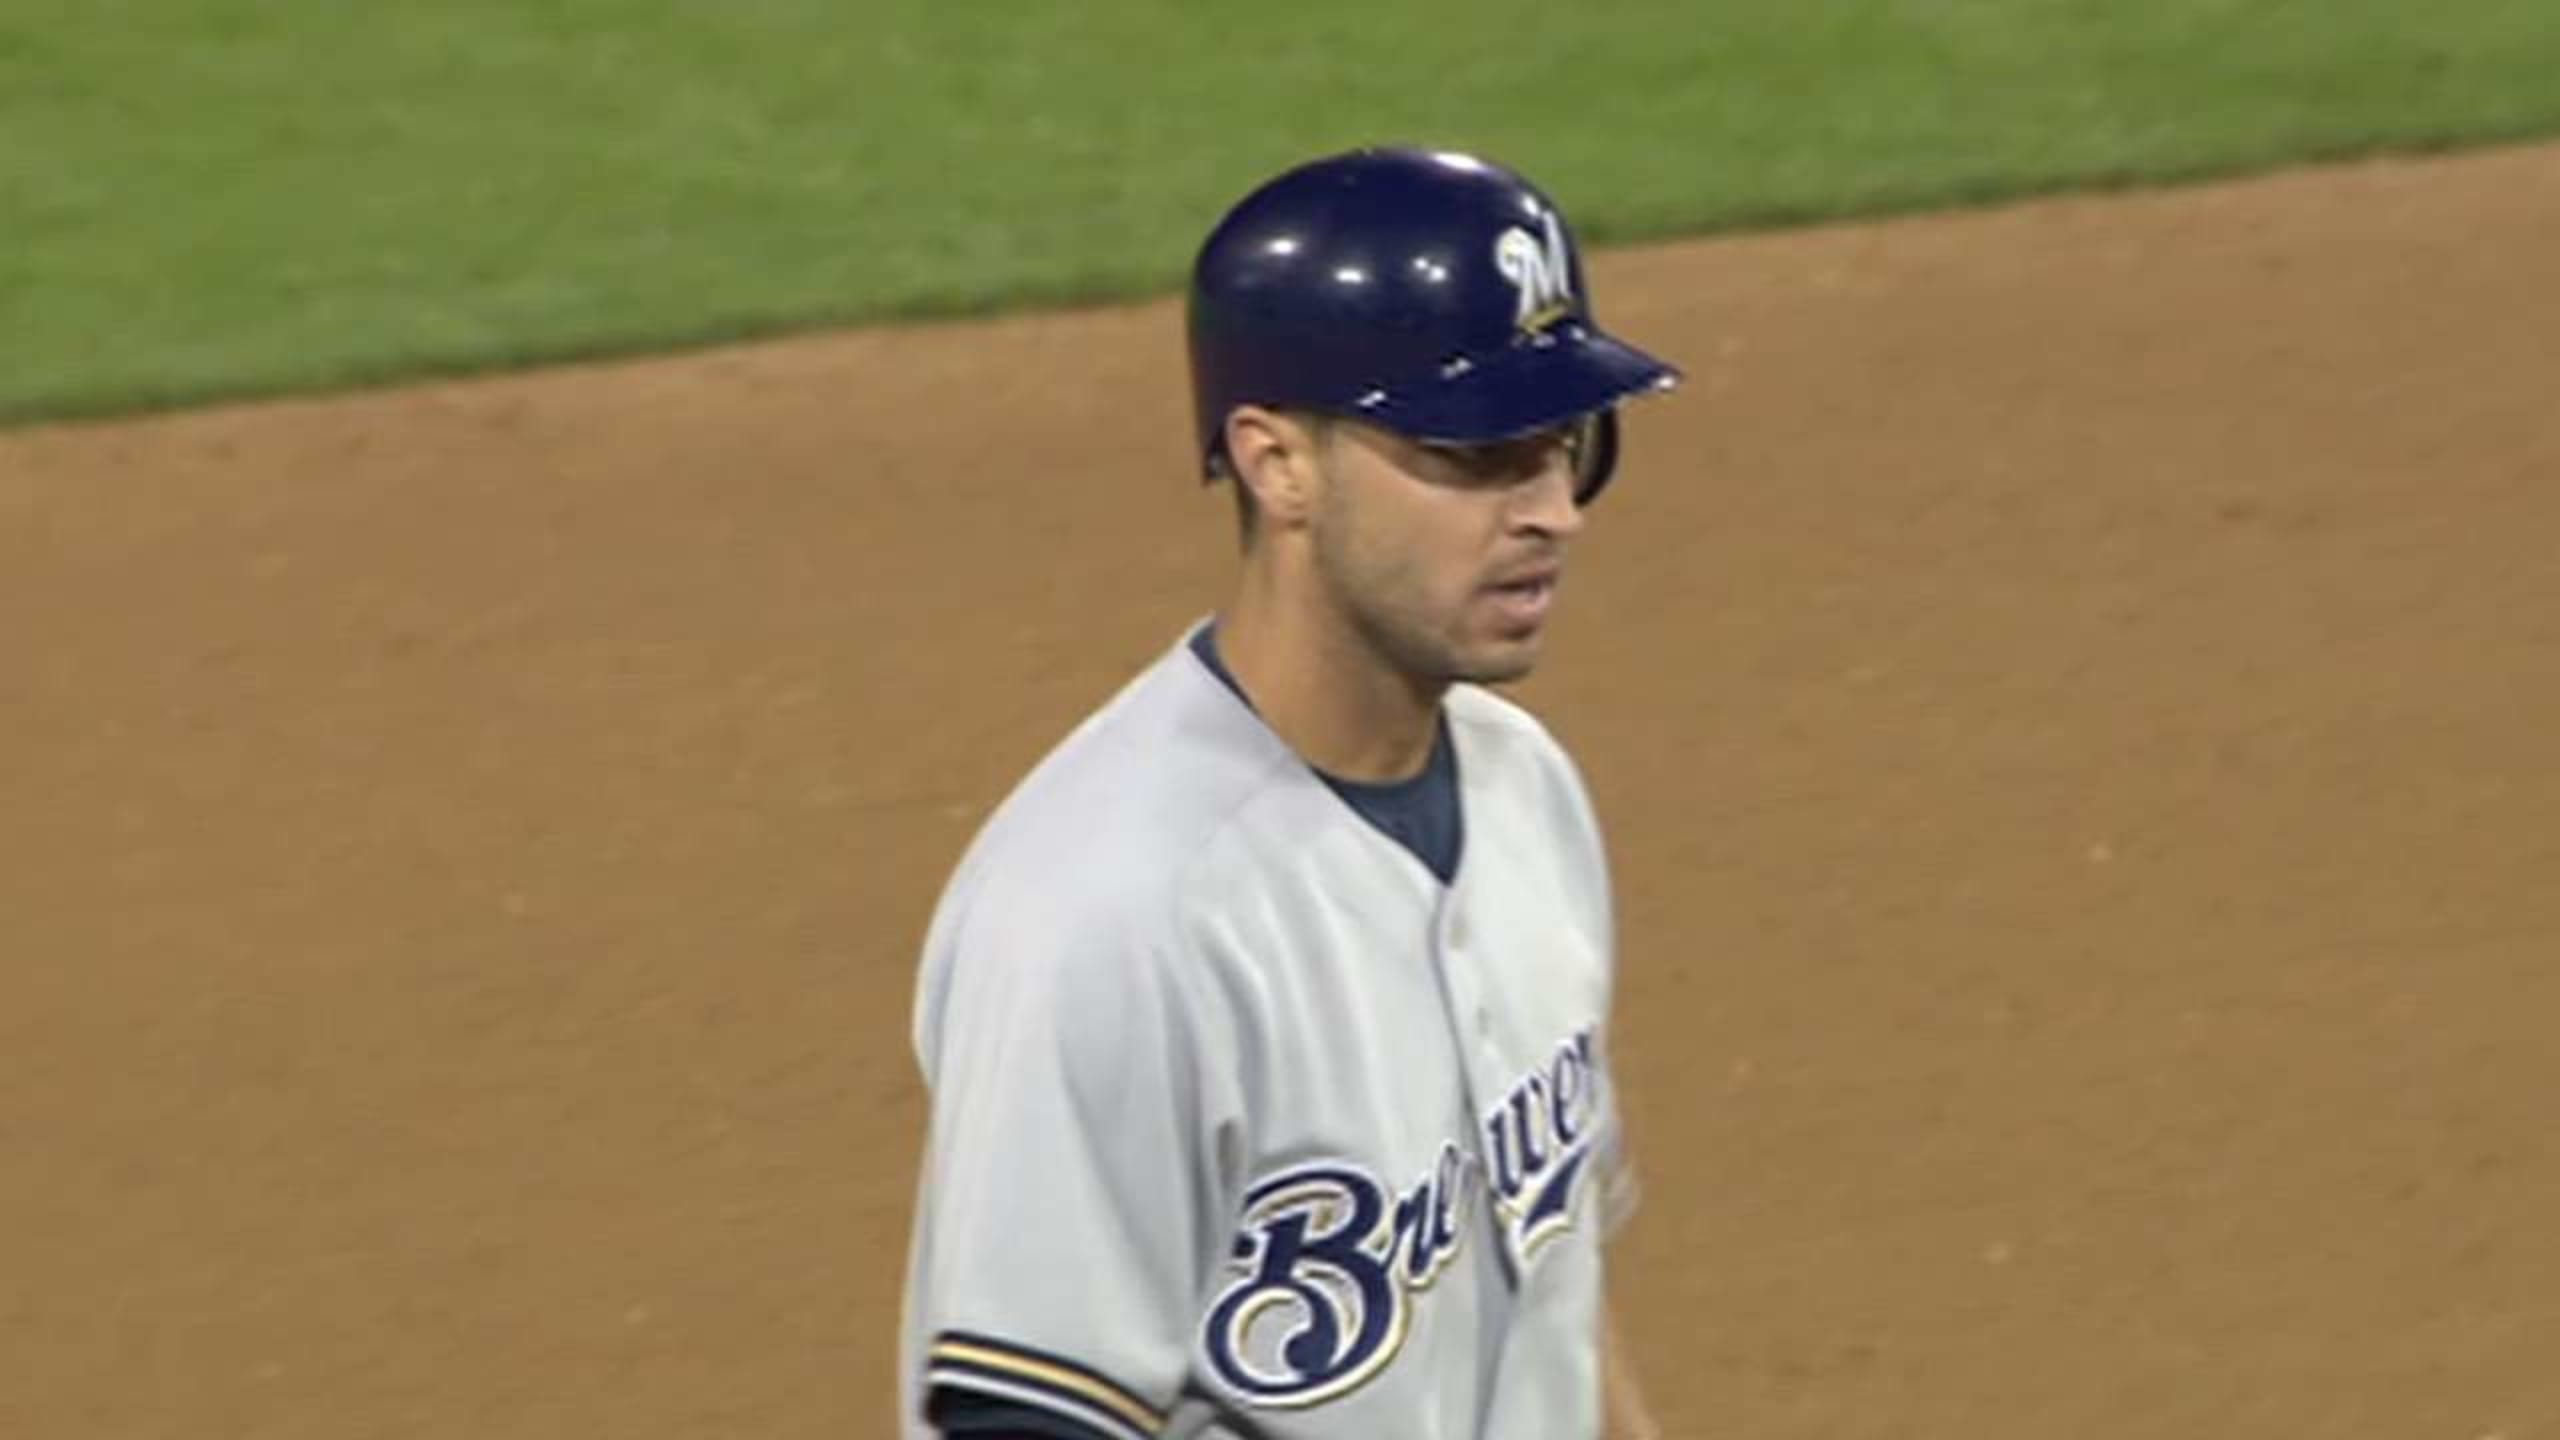 Unforgettable: Relive Ryan Braun's biggest moments during his all